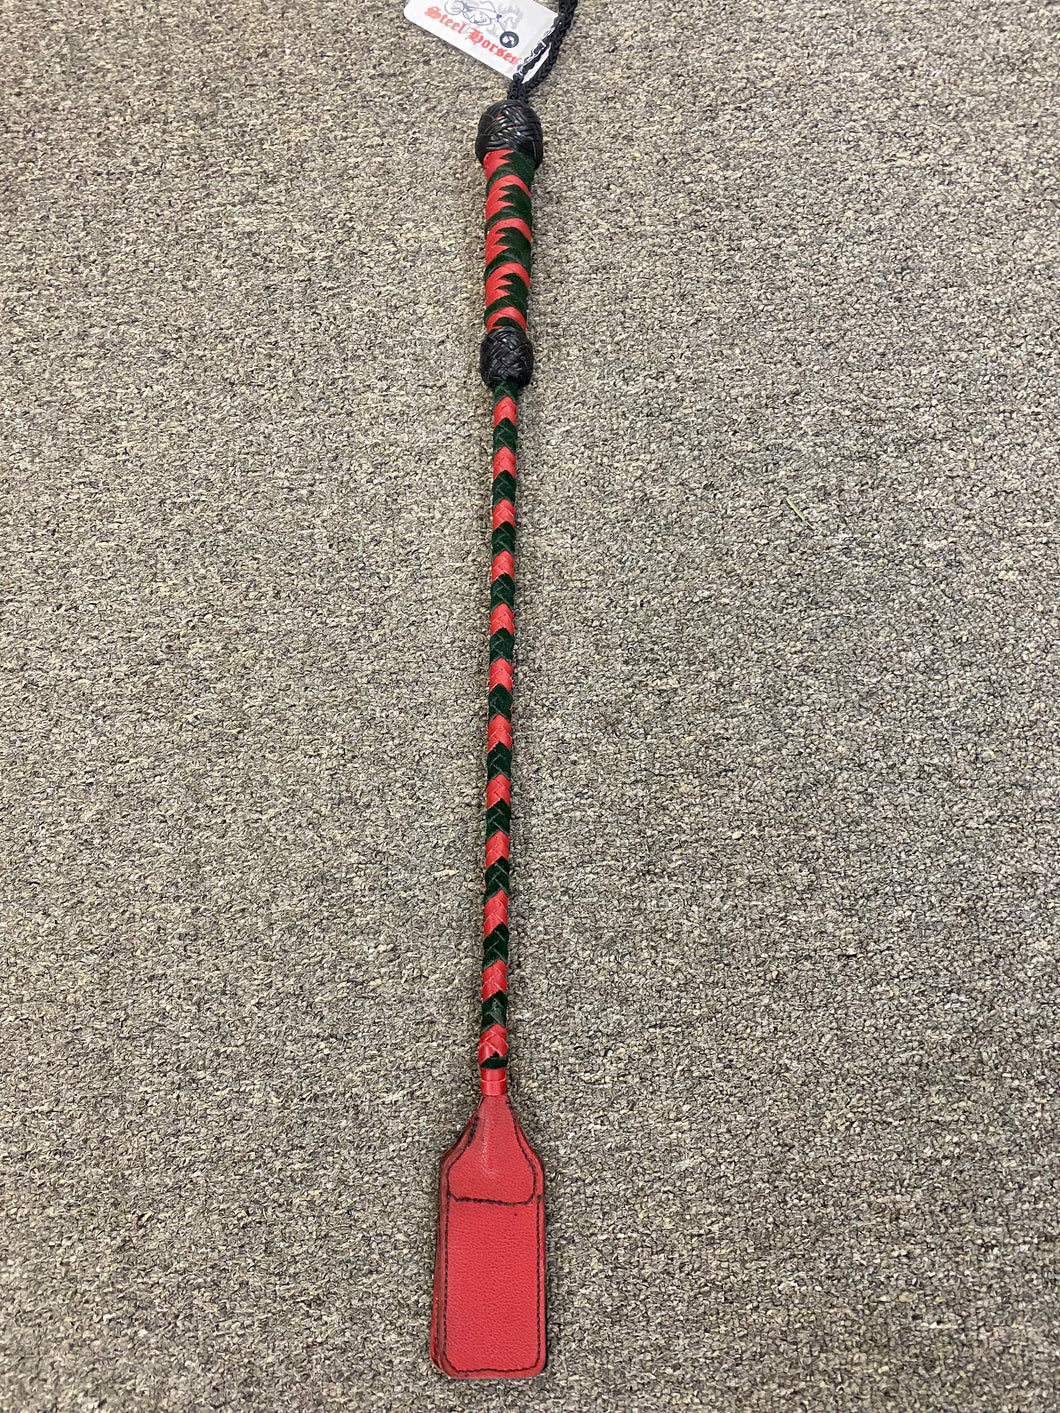 RED AND BLACK RIDING CROP BY DAN HOUCHINS